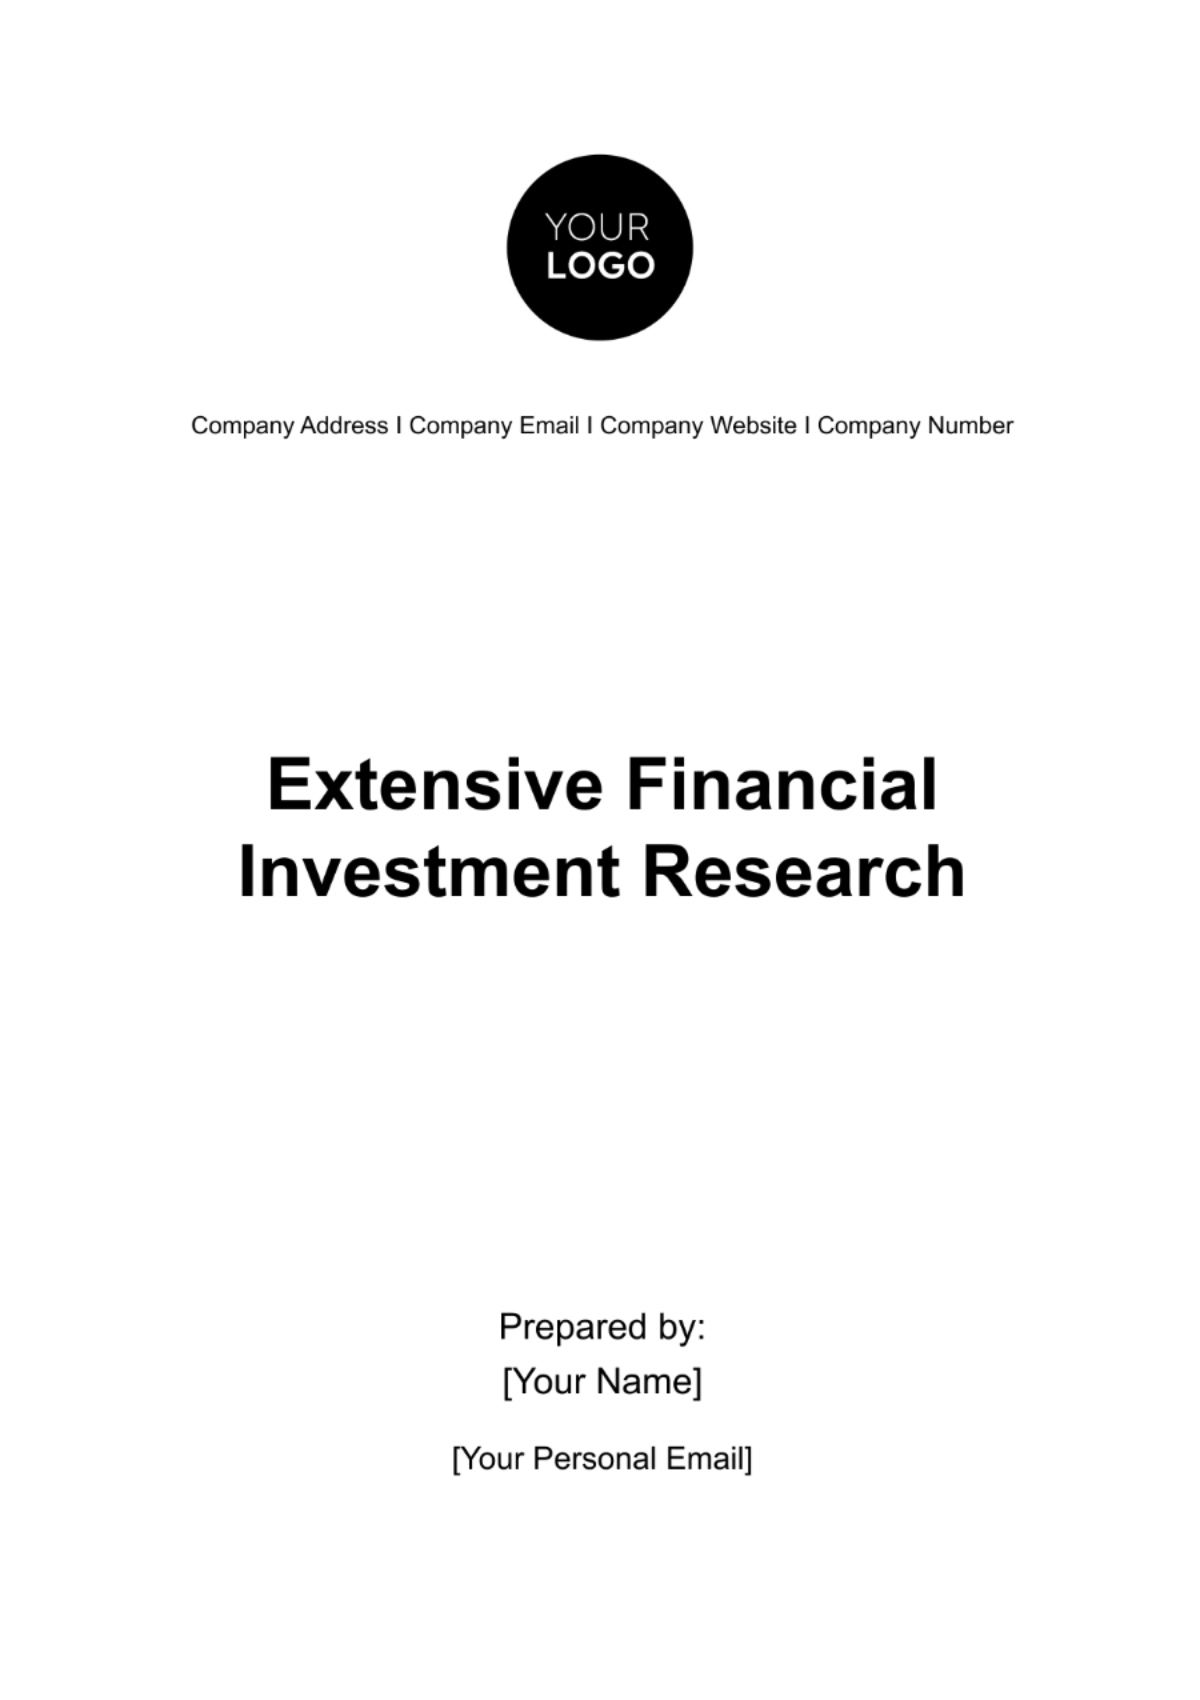 Extensive Financial Investment Research Template